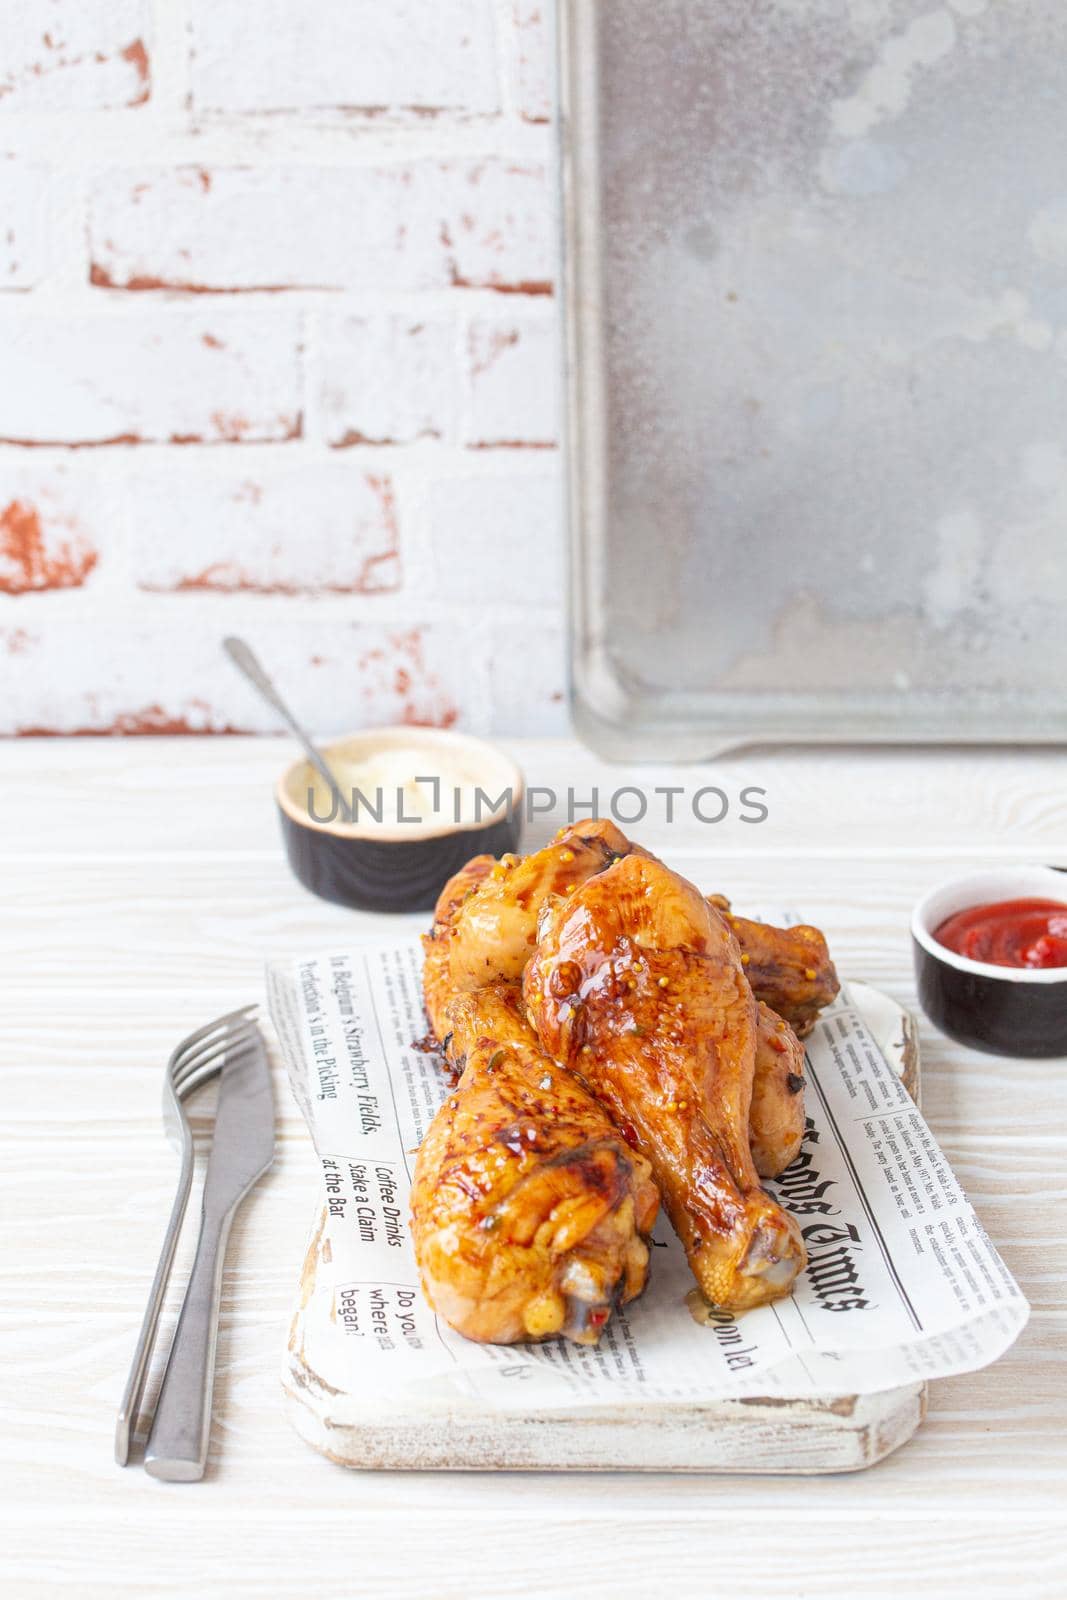 Roasted chicken legs drumsticks on wooden board with newspaper sheet served with ketchup and mayonnaise on rustic white wooden table, angle view